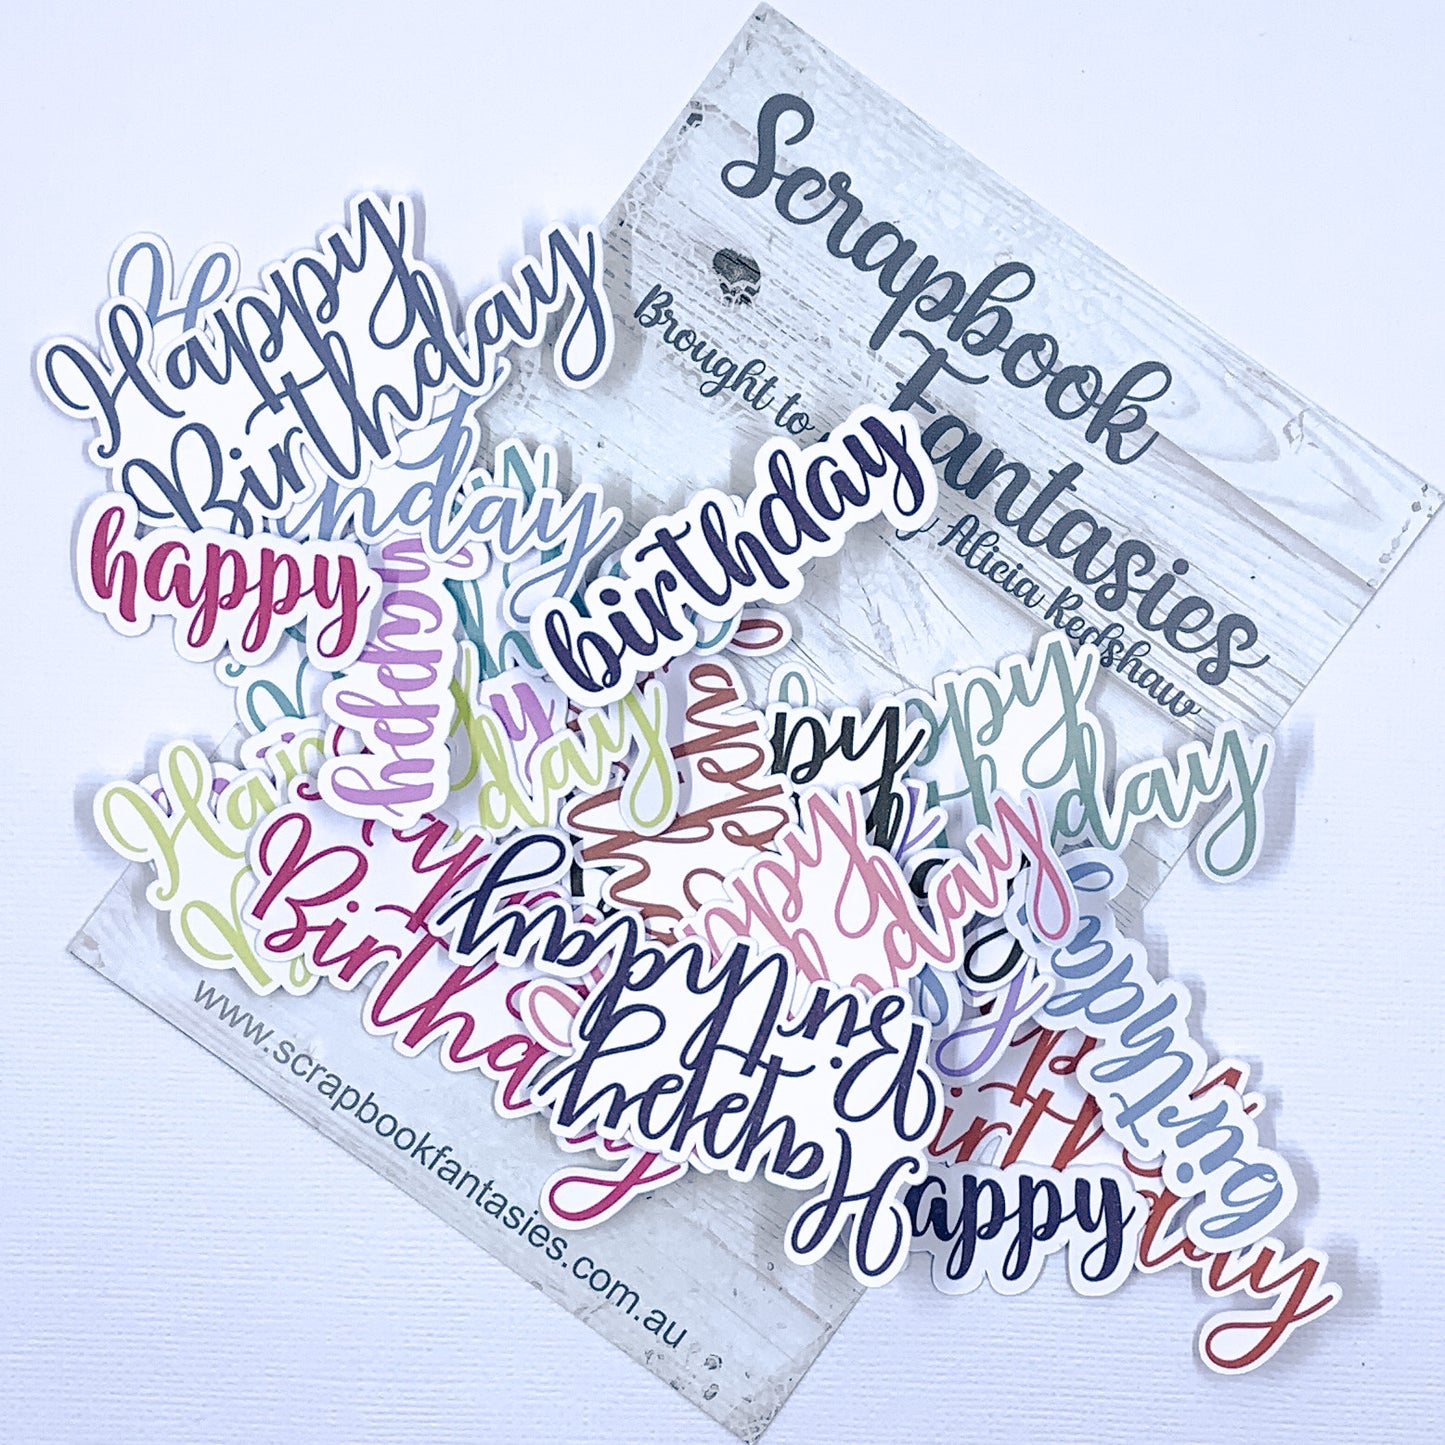 Glamorous - Happy Birthday Sentiments Colour-Cuts (19 pieces) Designed by Alicia Redshaw